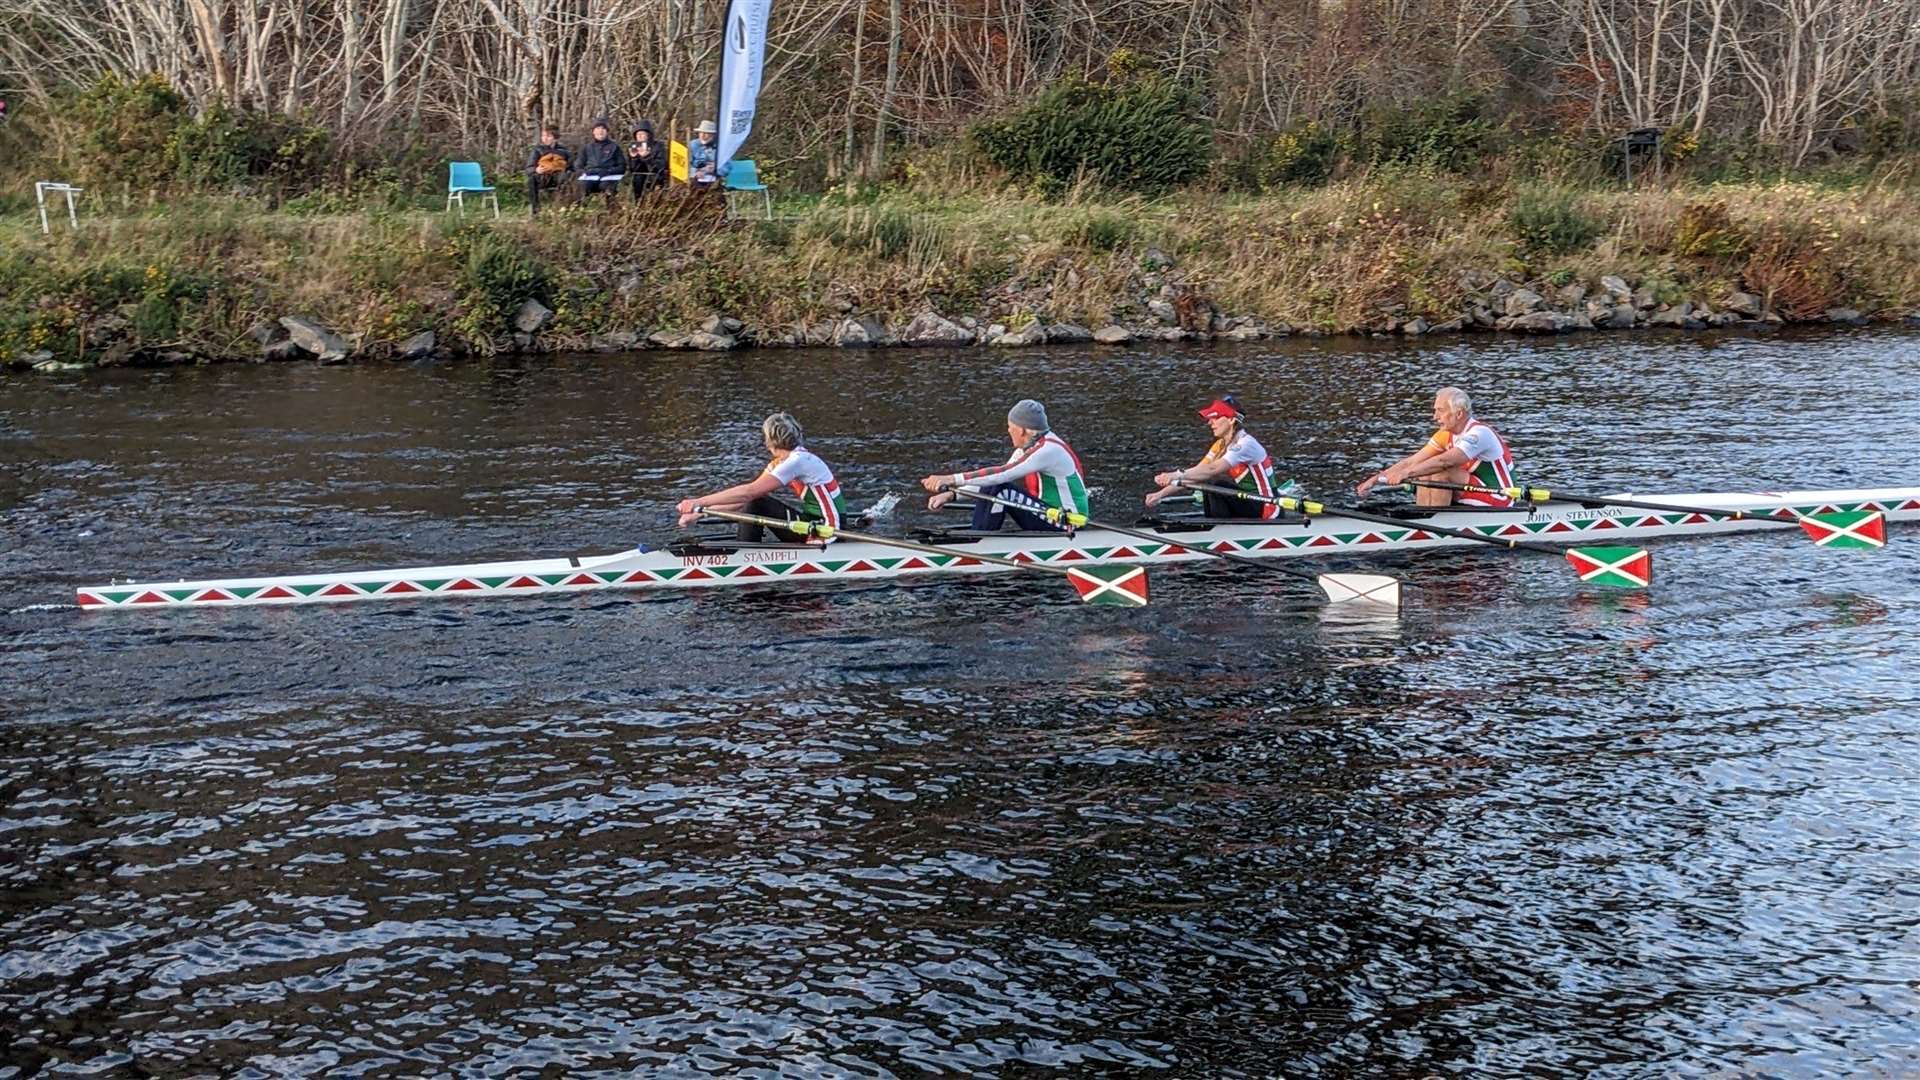 The winning Inverness Mixed Masters Quadruple Sculls crew crossing the finishing line - Dave Rotherwell at bow, Julie Fowlis at two, Tom Baker at three and Jude McManus in the stroke seat.